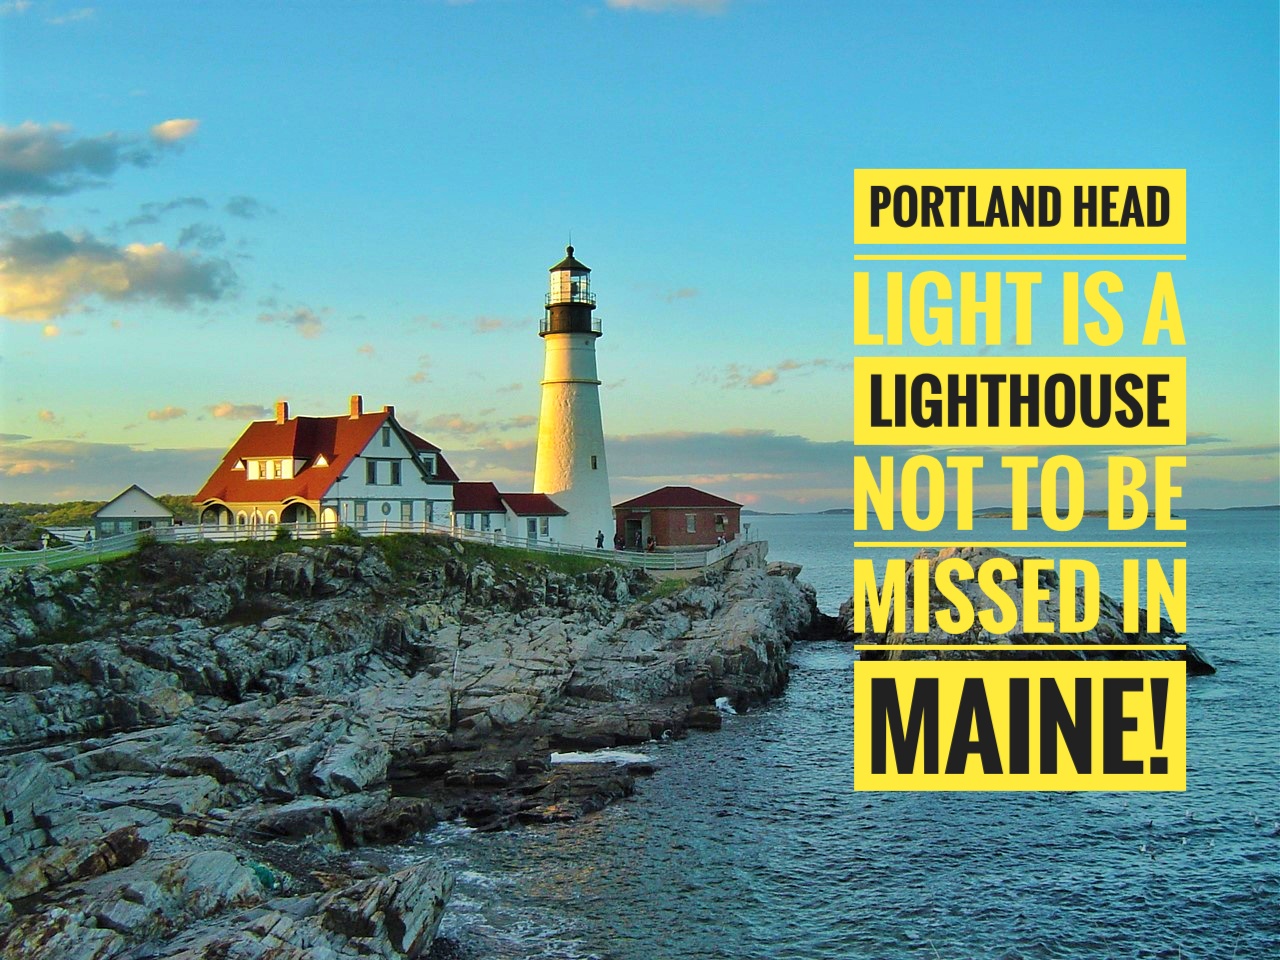 Portland Head Light is an iconic lighthouse not to be missed if visiting Portland, Maine, along with the stunningly beautiful shoreline of Fort Williams Park that surrounds it. Make sure to experience all the natural beauty and Treasures Of Traveling this park has to offer!